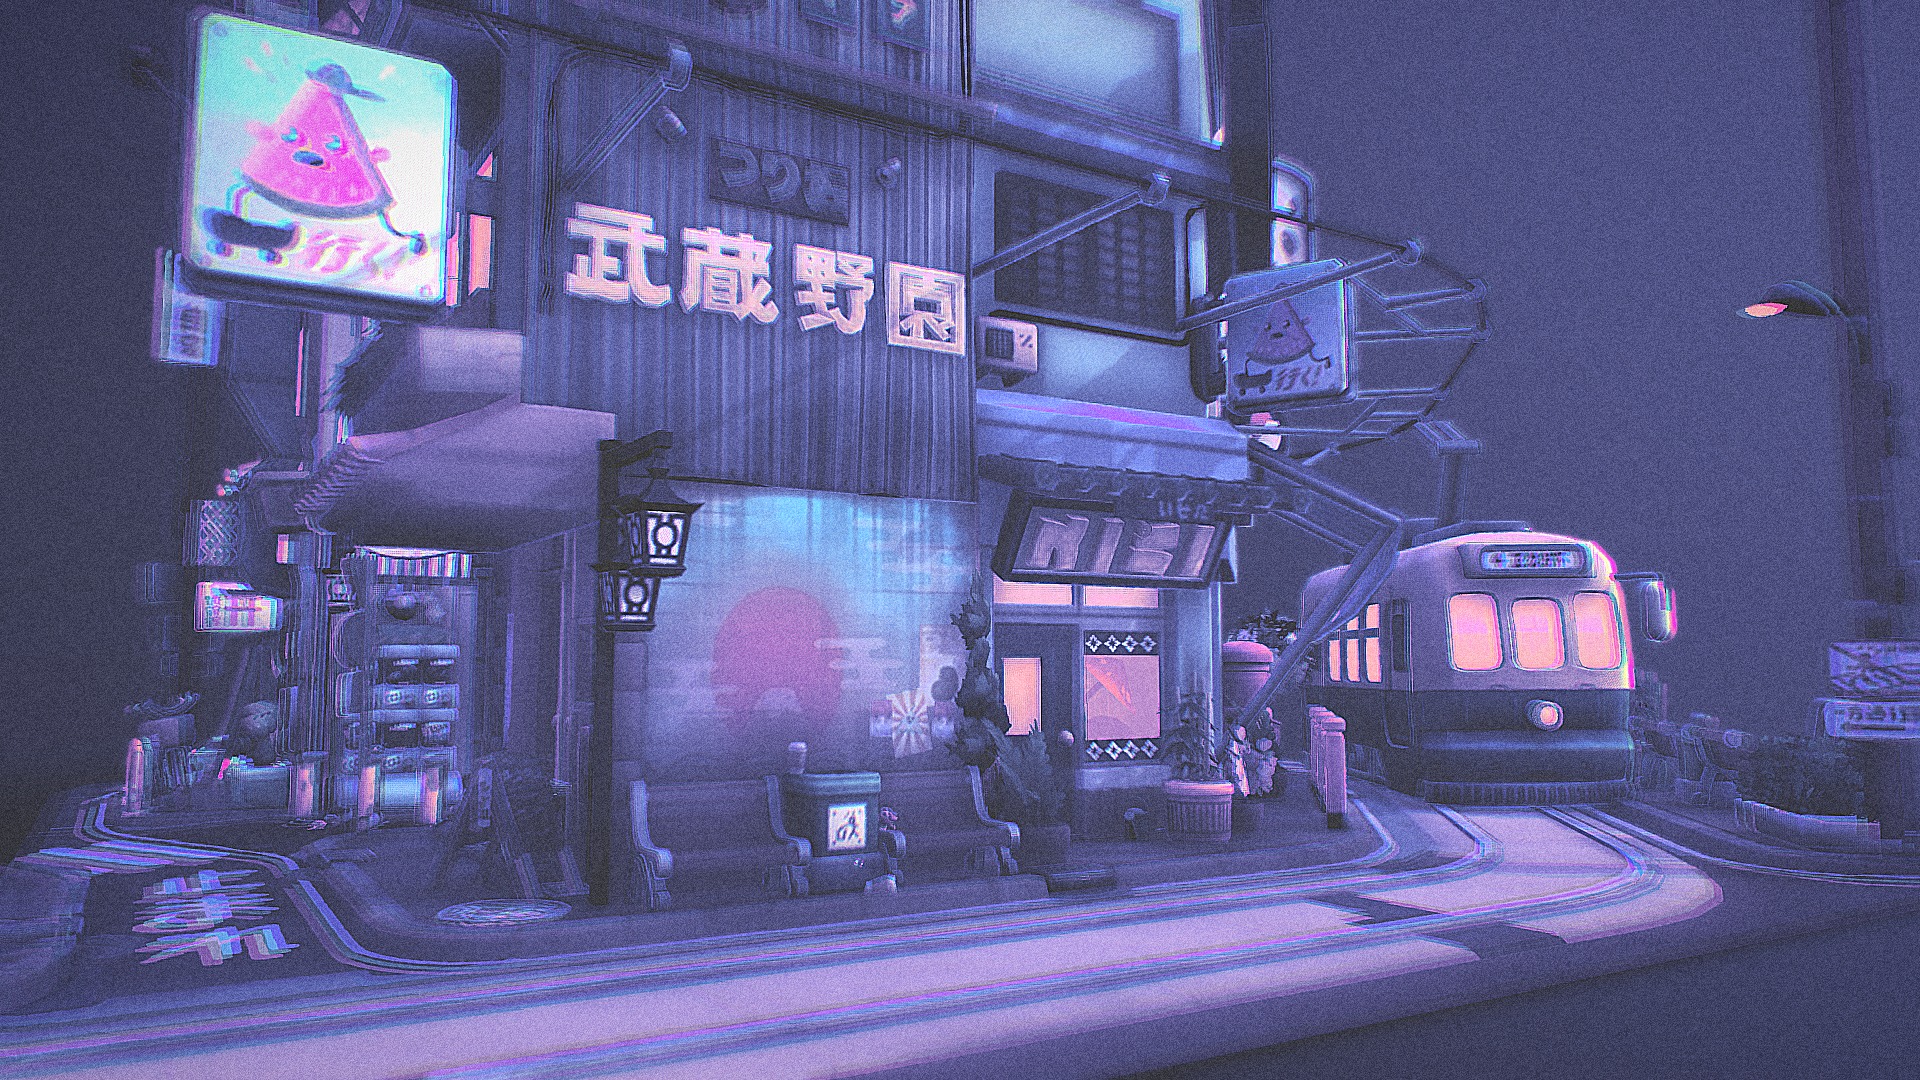 My entry for the 3D Editor Challenge

I wanted the entire scene to feel like the cover of a vaporwave album, and even added some music to fit in with the scene. Hope you guys enjoy the different take on it.

Music from Killer in Kowloon by Virtual Vice CHeck him out on bandcamp! https://virtual-vice.bandcamp.com/

As for edits, I applied a lot of noise while lowering contrast and harshly color balancing it to fit with the blown out vaporwave colors. I also applied some emission and chromatic aberation to add a distorted light effect.

Truly a fun experience to see what exetremes can be done with the 3D editor!

Based on the wonderful model “Littlest Tokyo” by glenatron, licensed under CC Attribution-ShareAlike 3d model